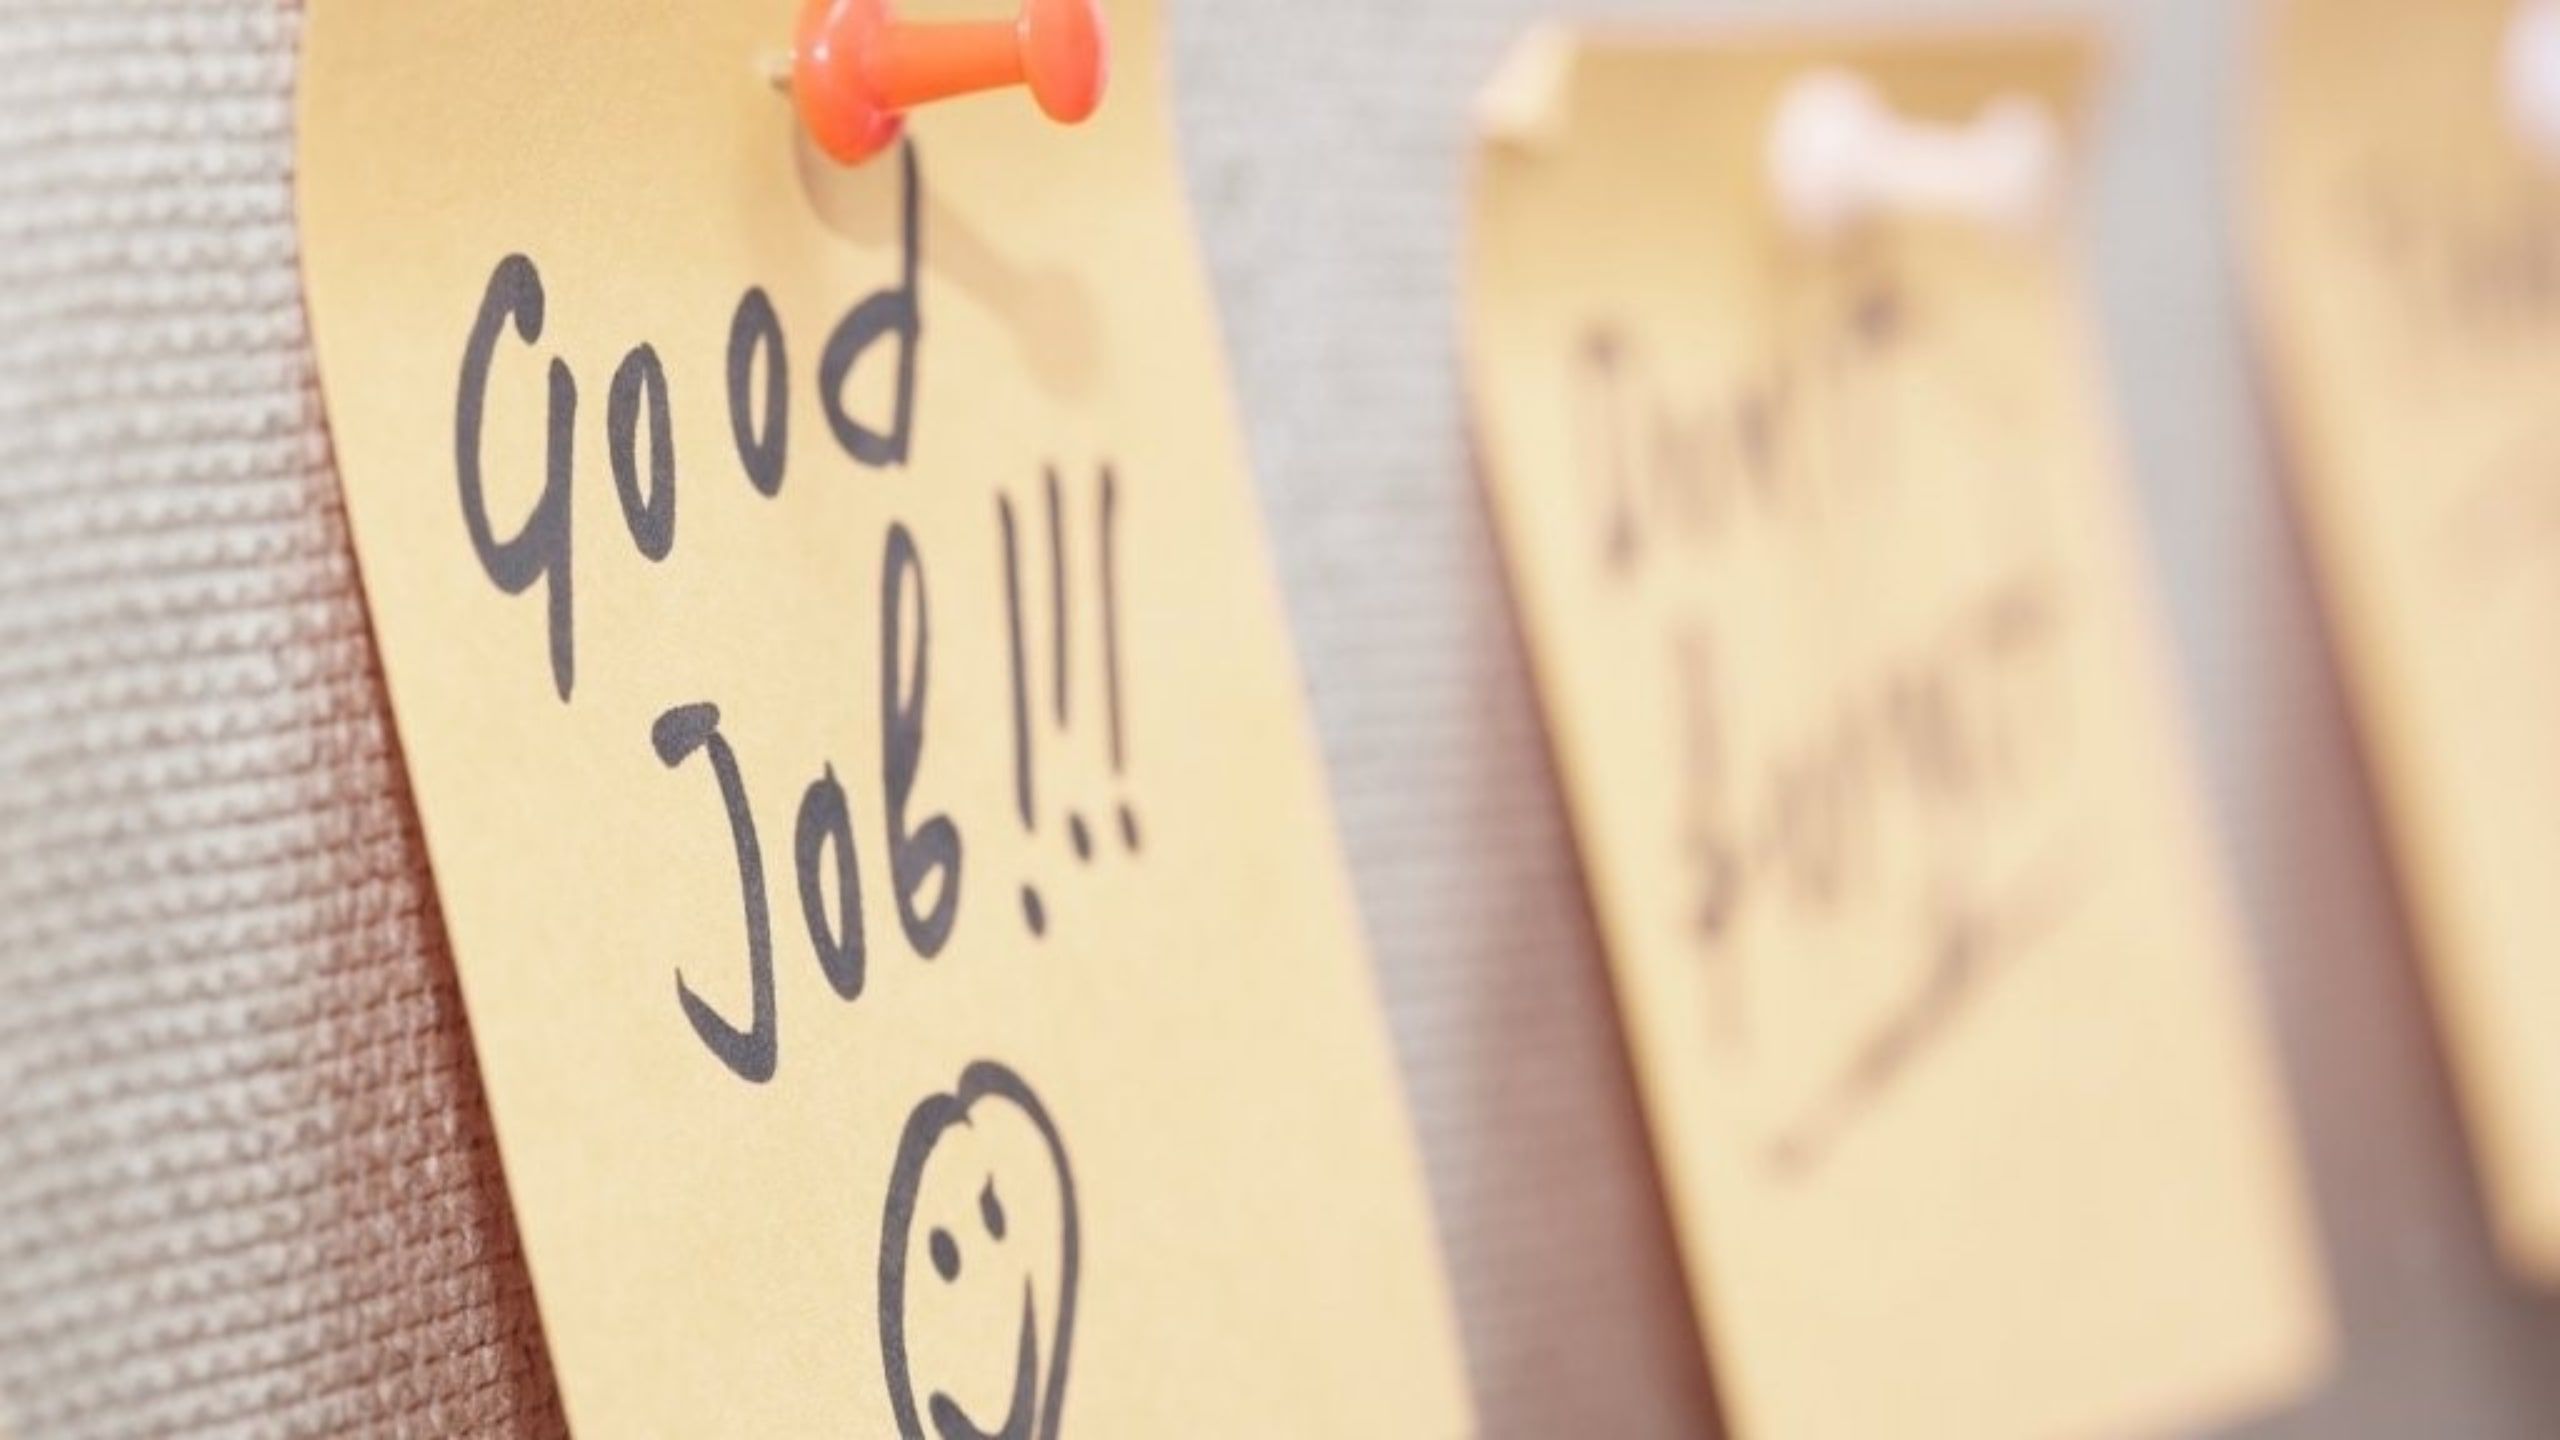 a note says good job to motivate employees 